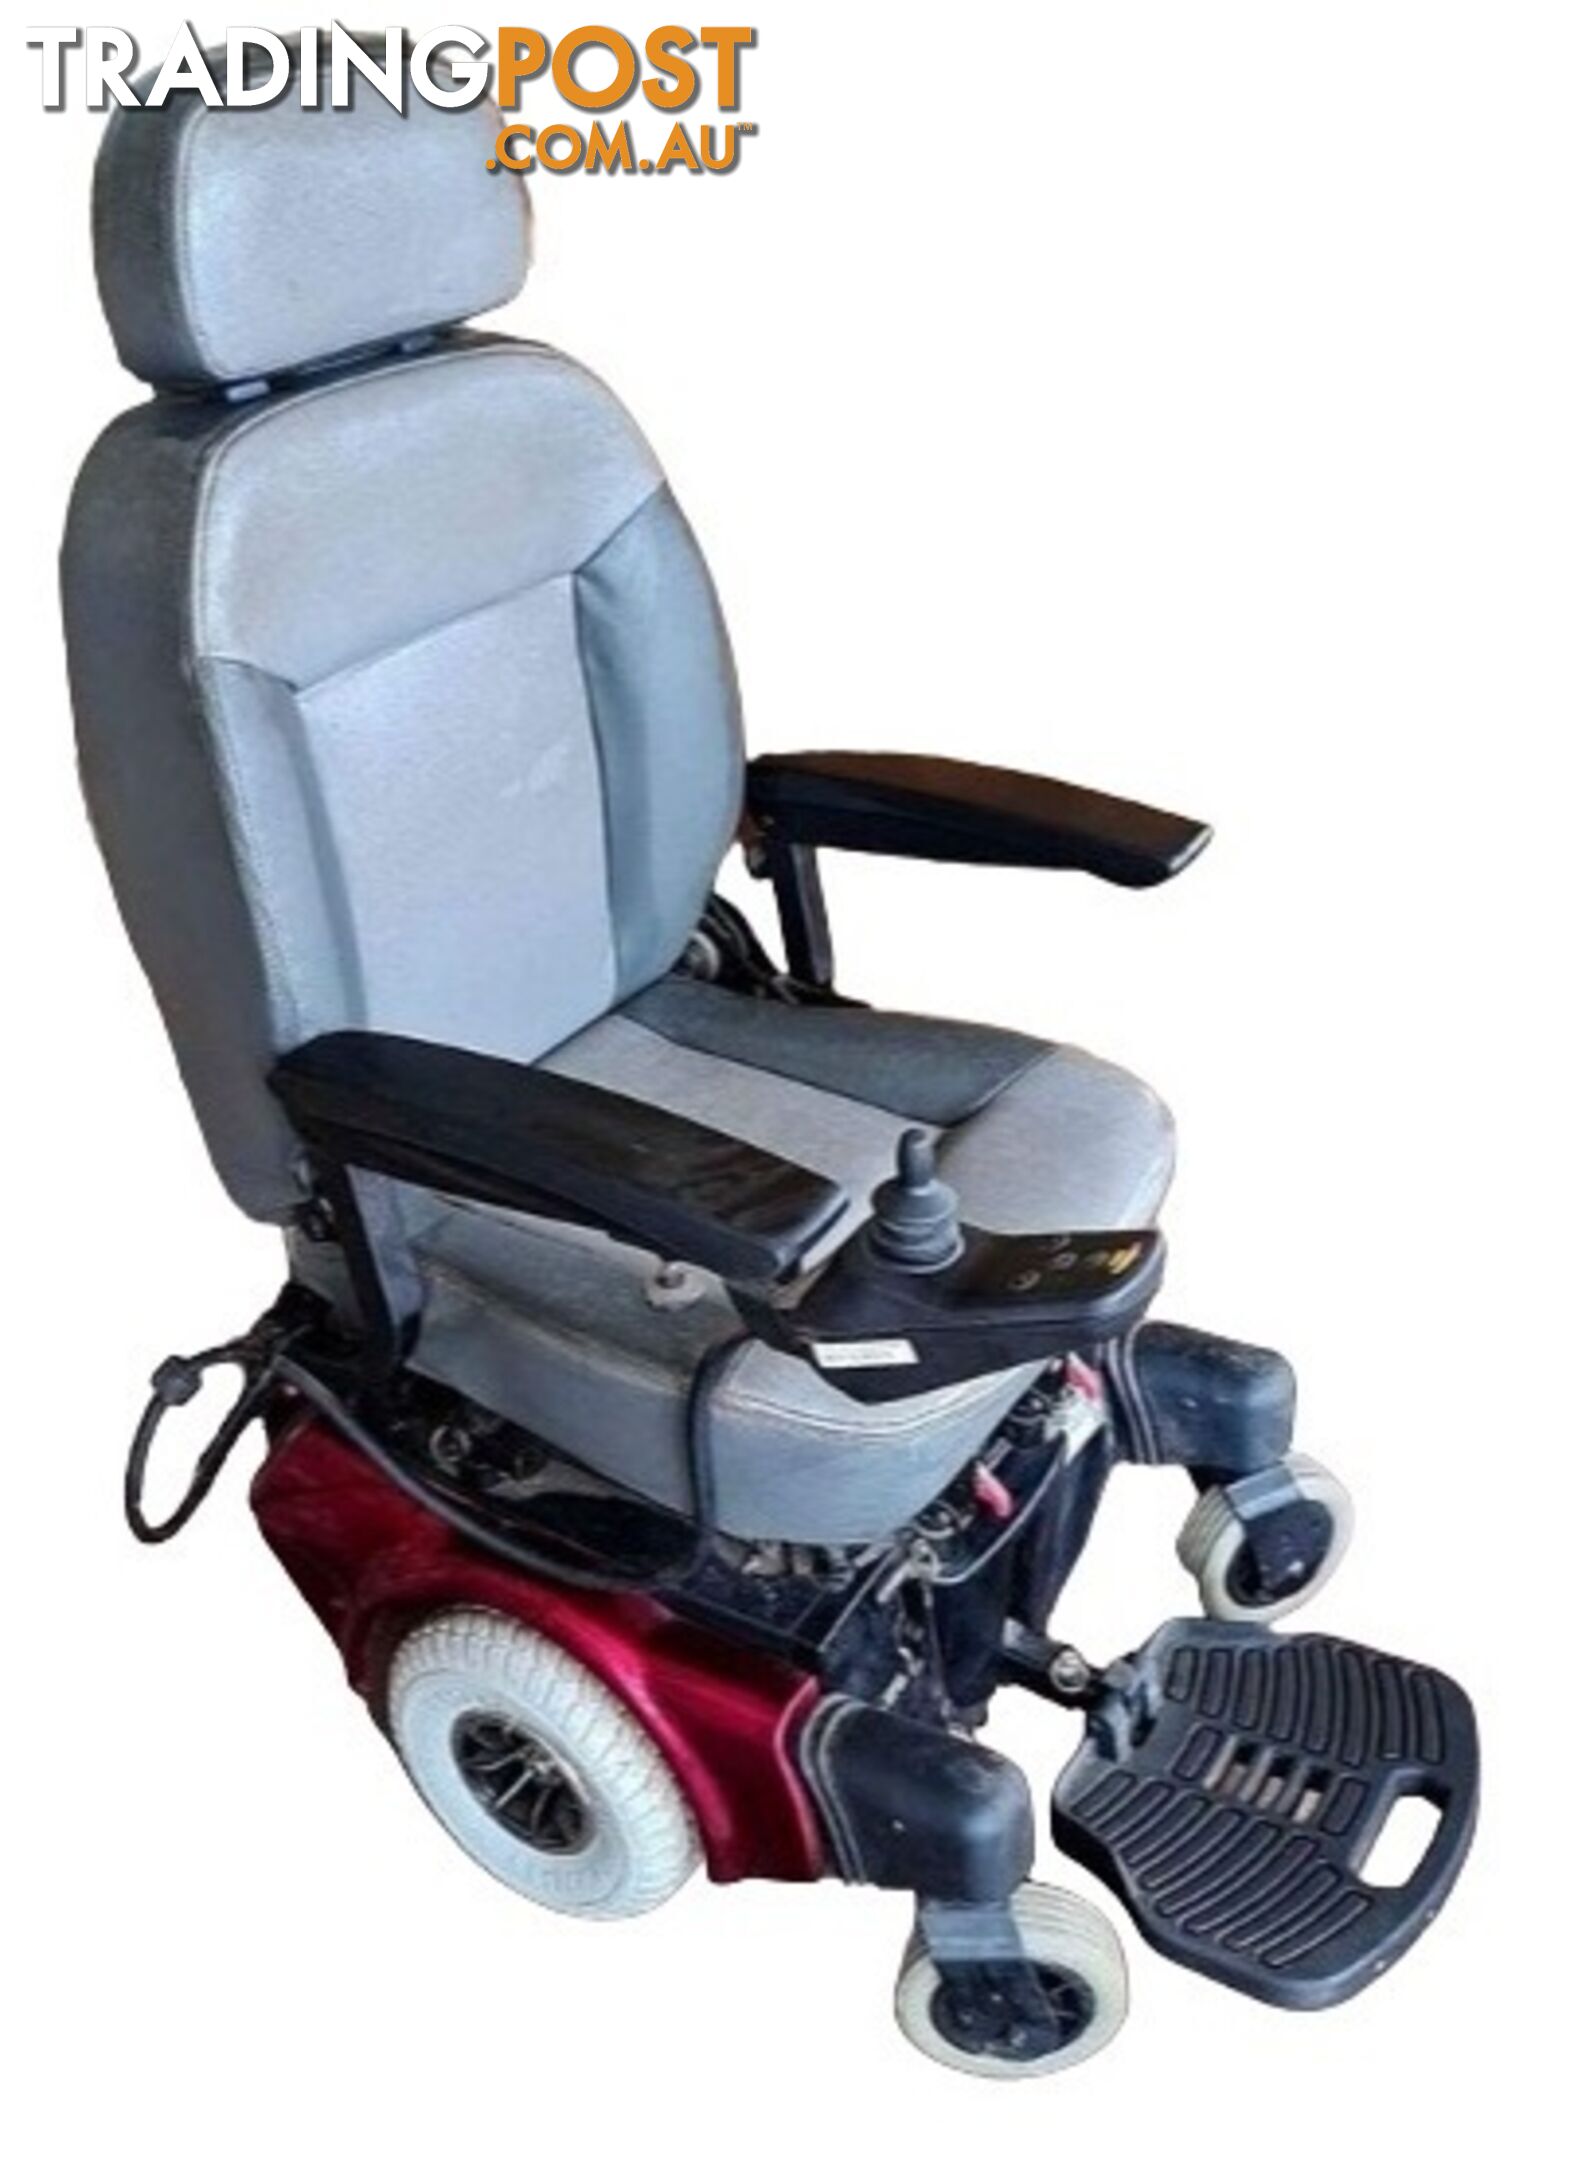 Power Chair - Cougar 10 - VGC - With Safety Certificate